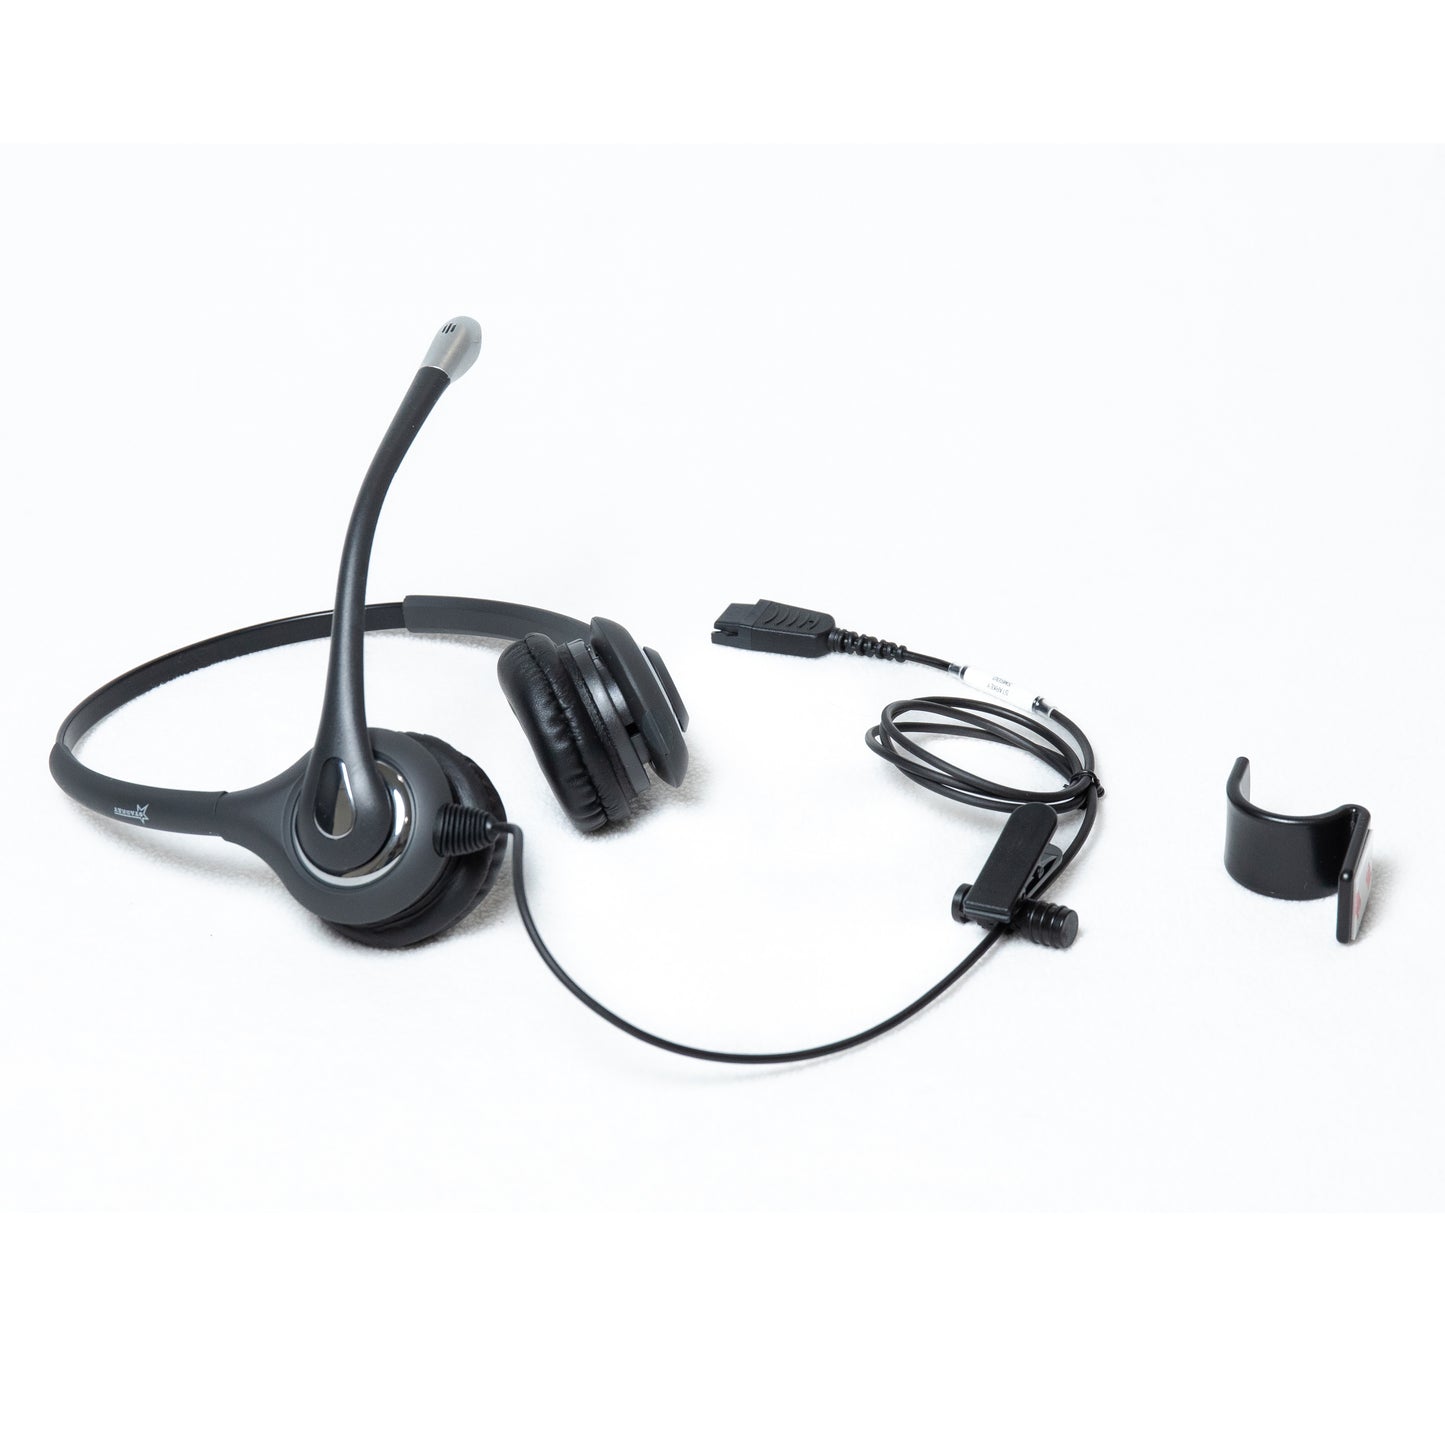 Starkey SM600-NC Military Headset with Passive Noise Canceling Mic